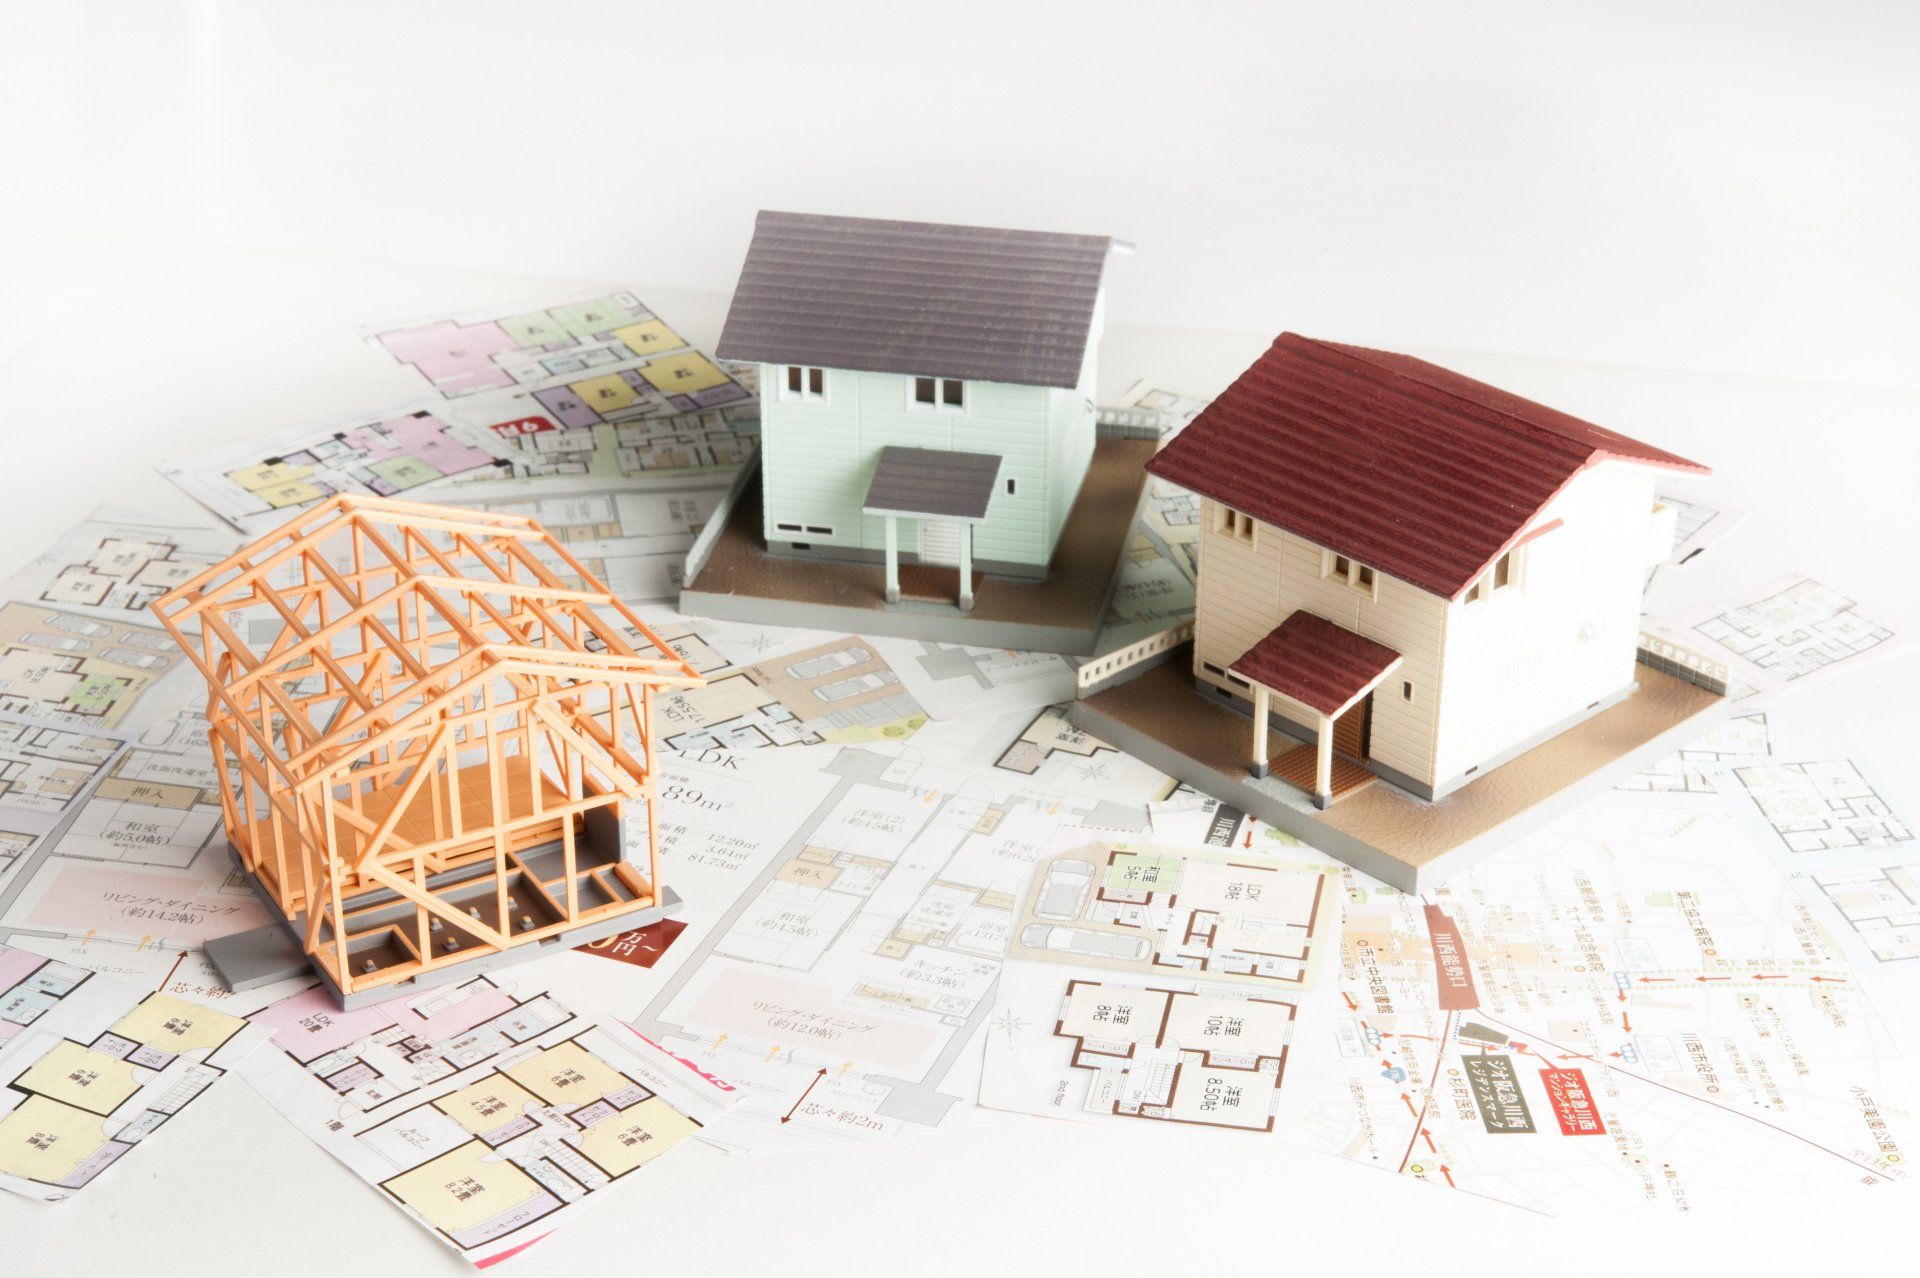 Three models of houses sitting on top of building plans.